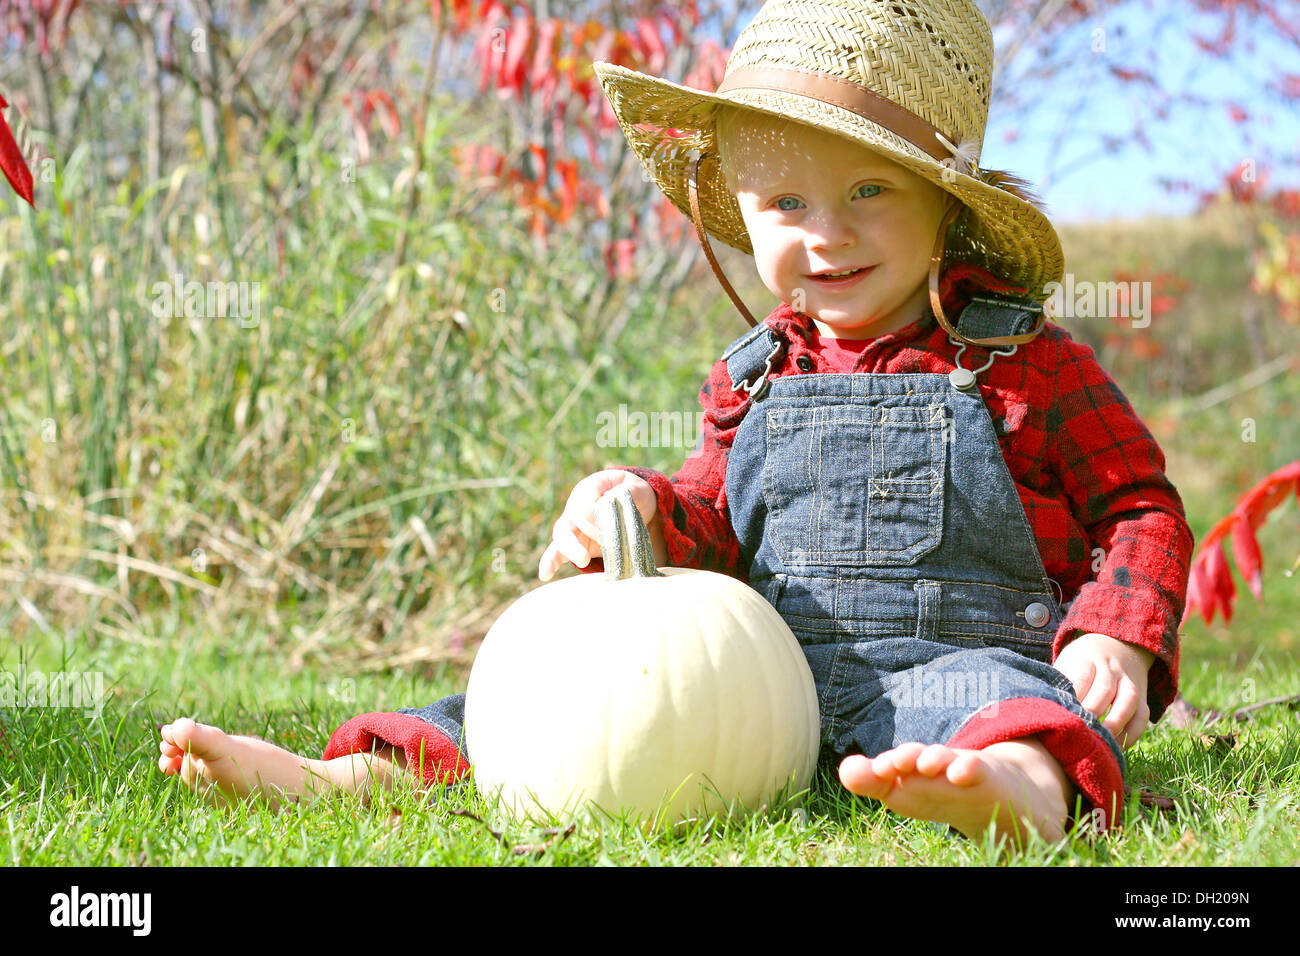 a cute, smiling baby boy is sitting outside in the grass with a white pumpkin on a sunny autumn day, dressed like a farmer Stock Photo